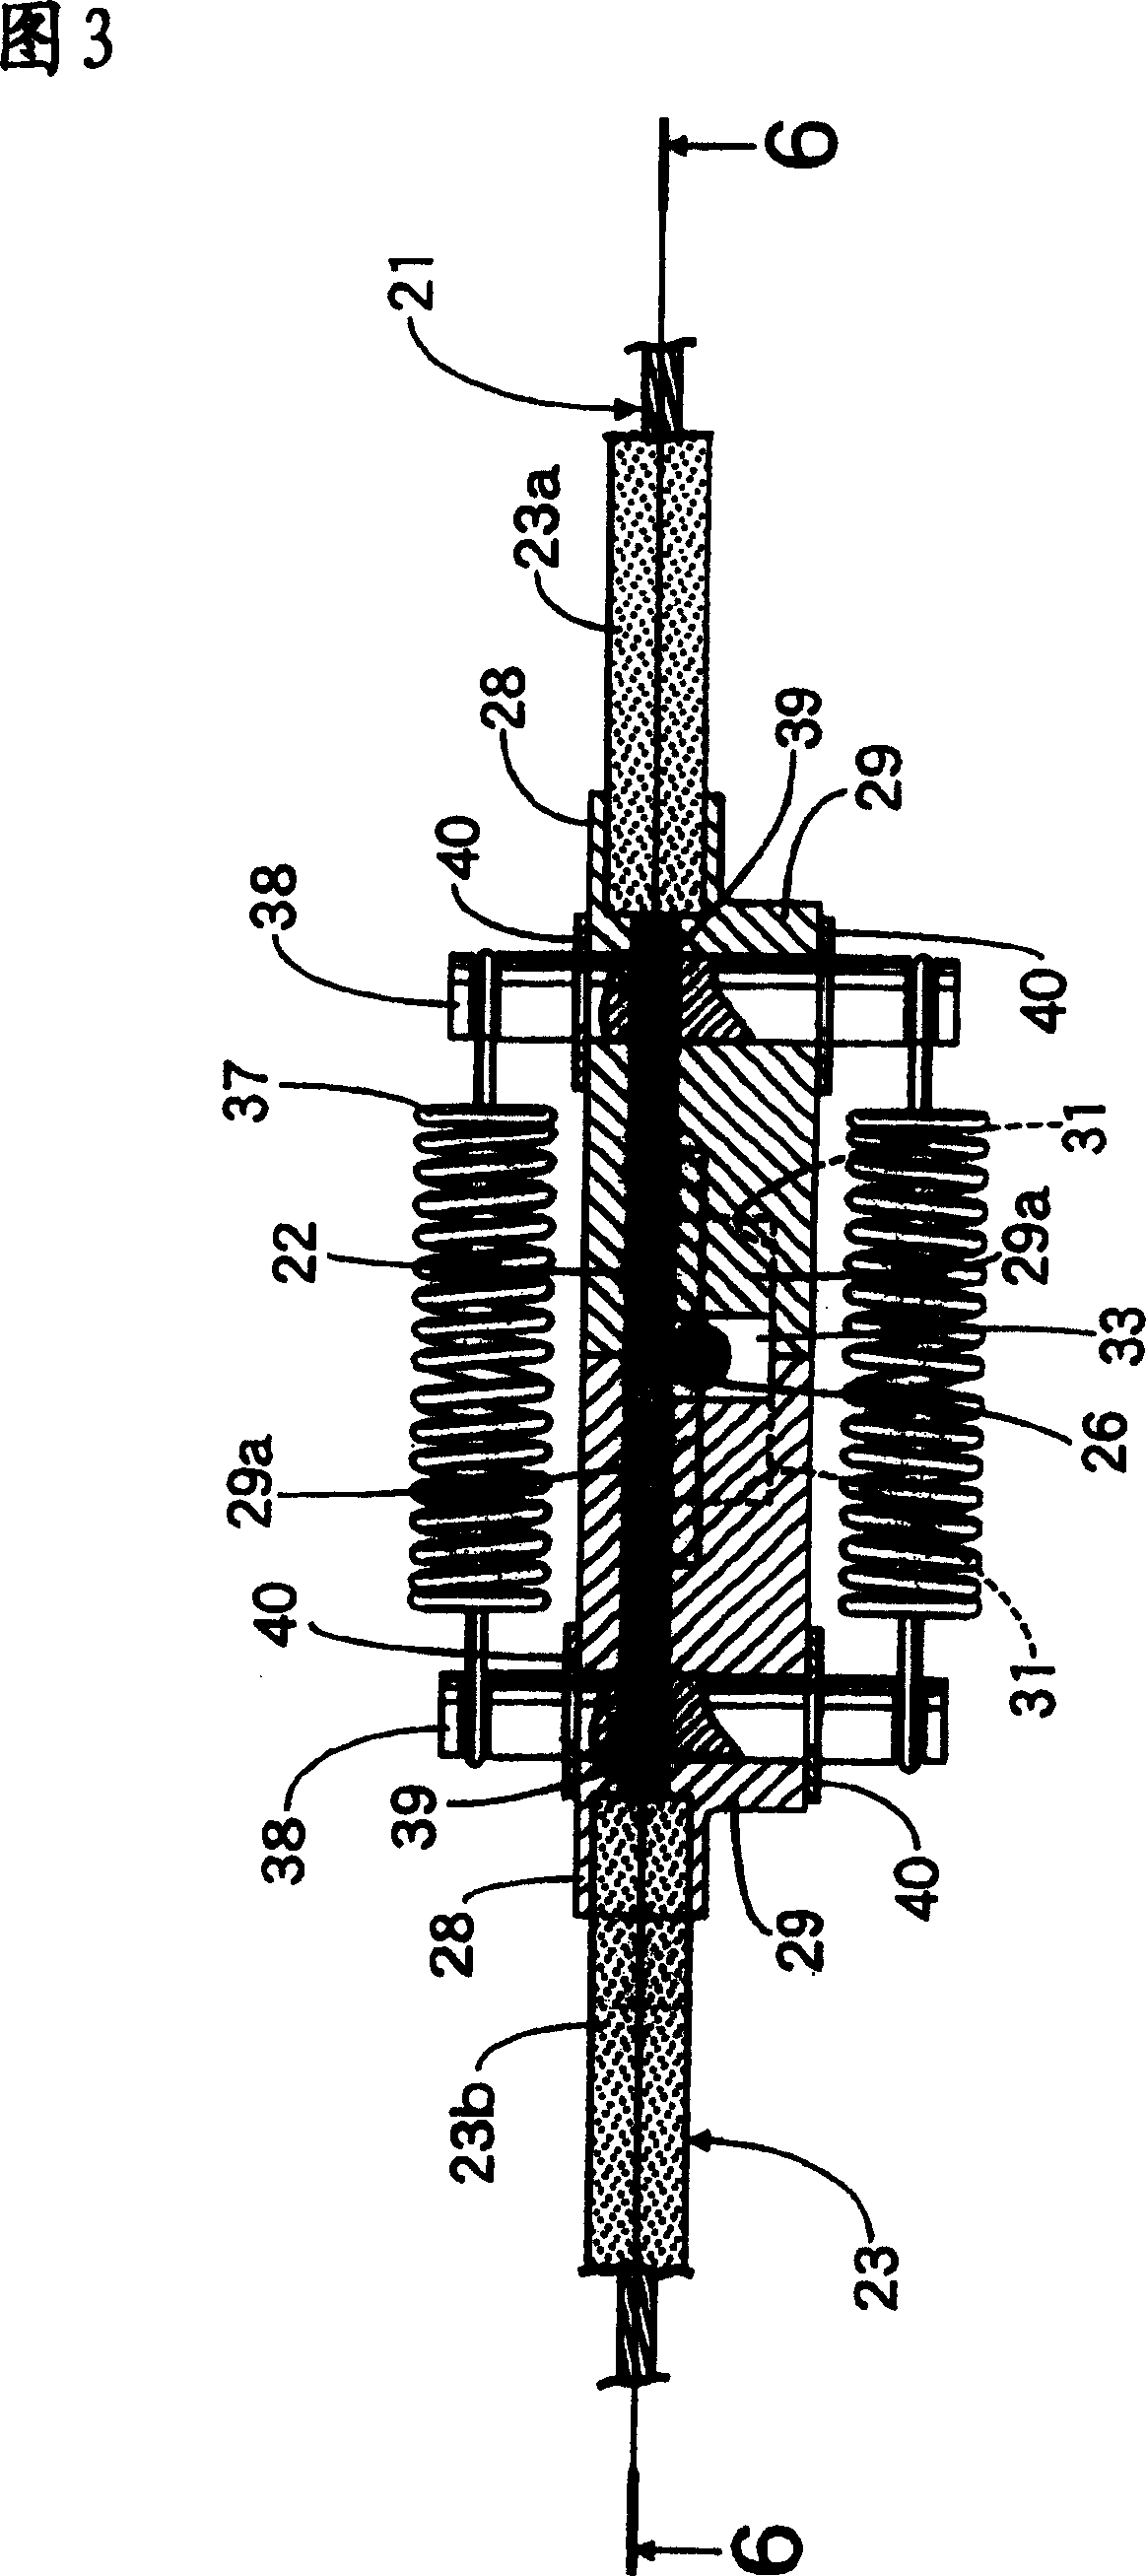 Braking device for small vehicle